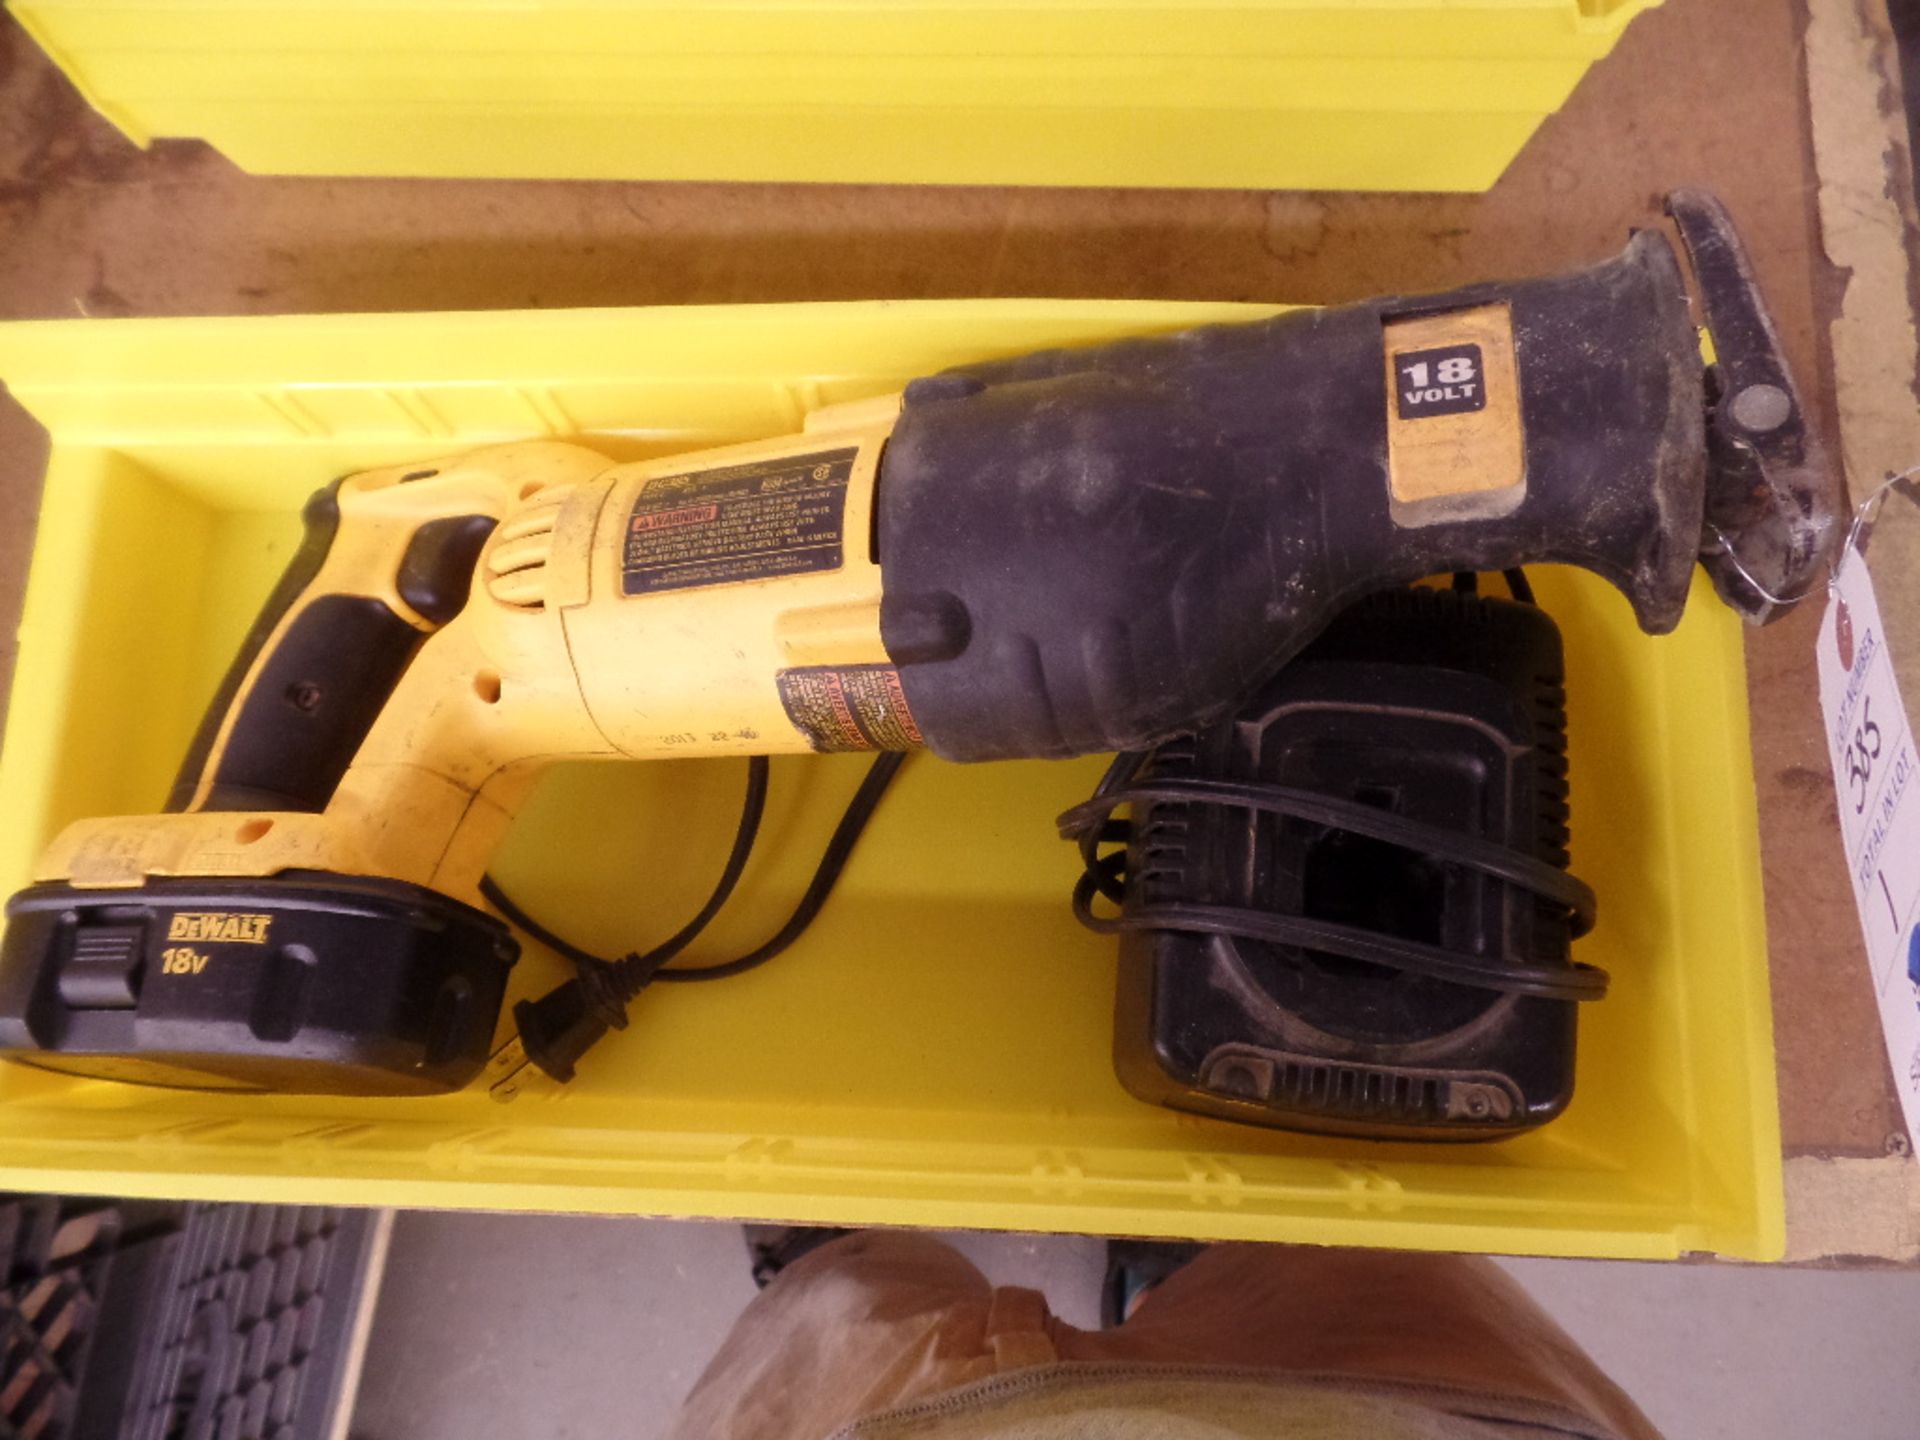 Dewalt #DC385 18 Volt Cordless Variable Speed Reciprocating Saw W/ Battery & Charger